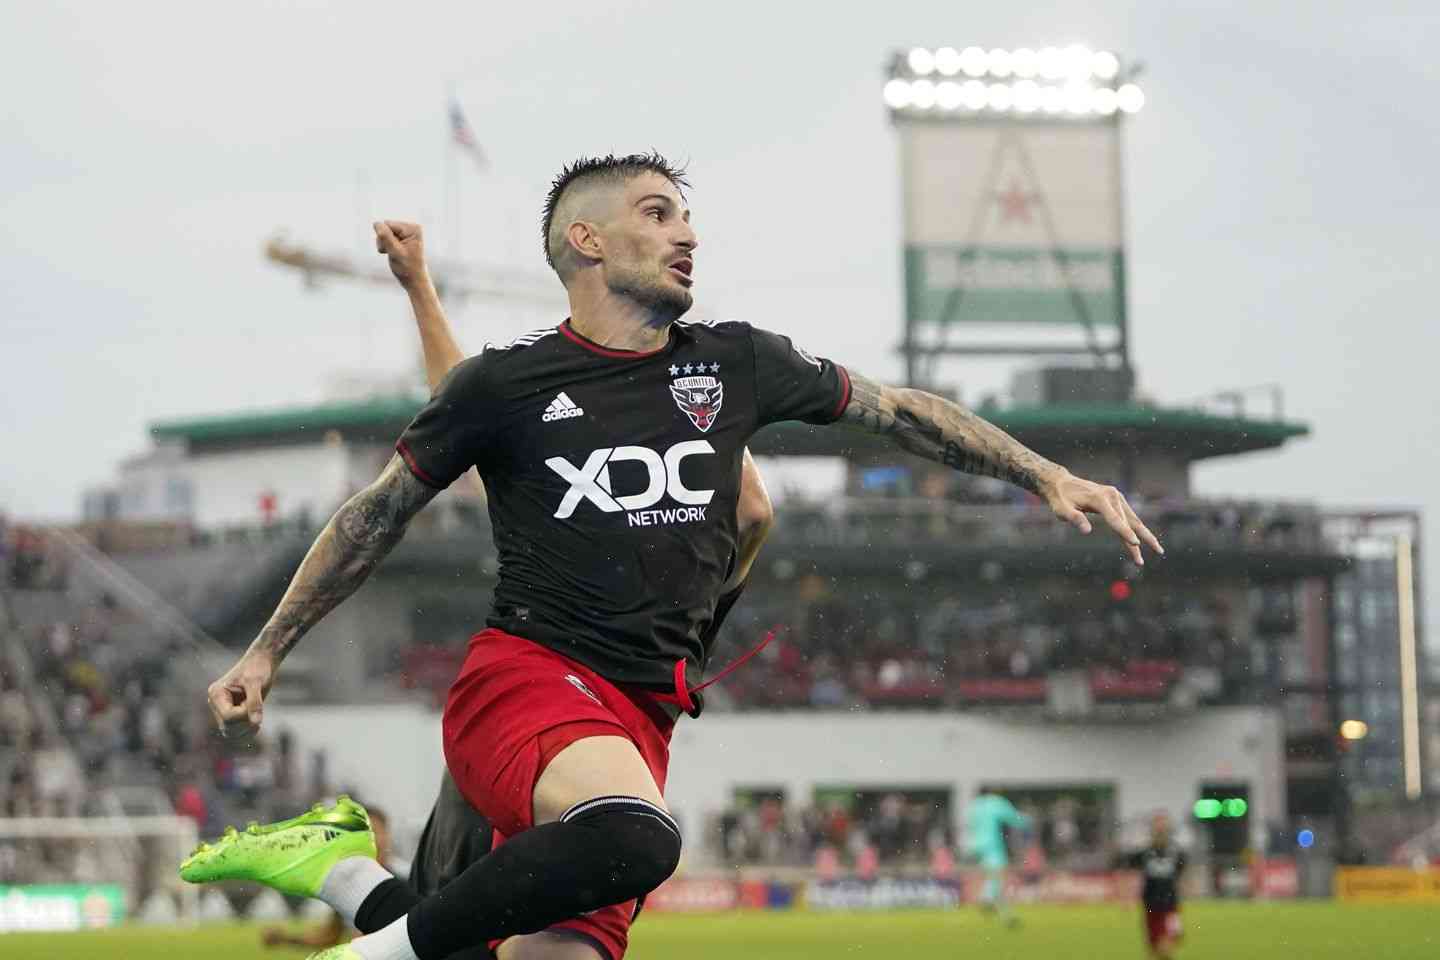 Michael Stephens is the latest MLS player to offend the most powerful voice in World Soccer